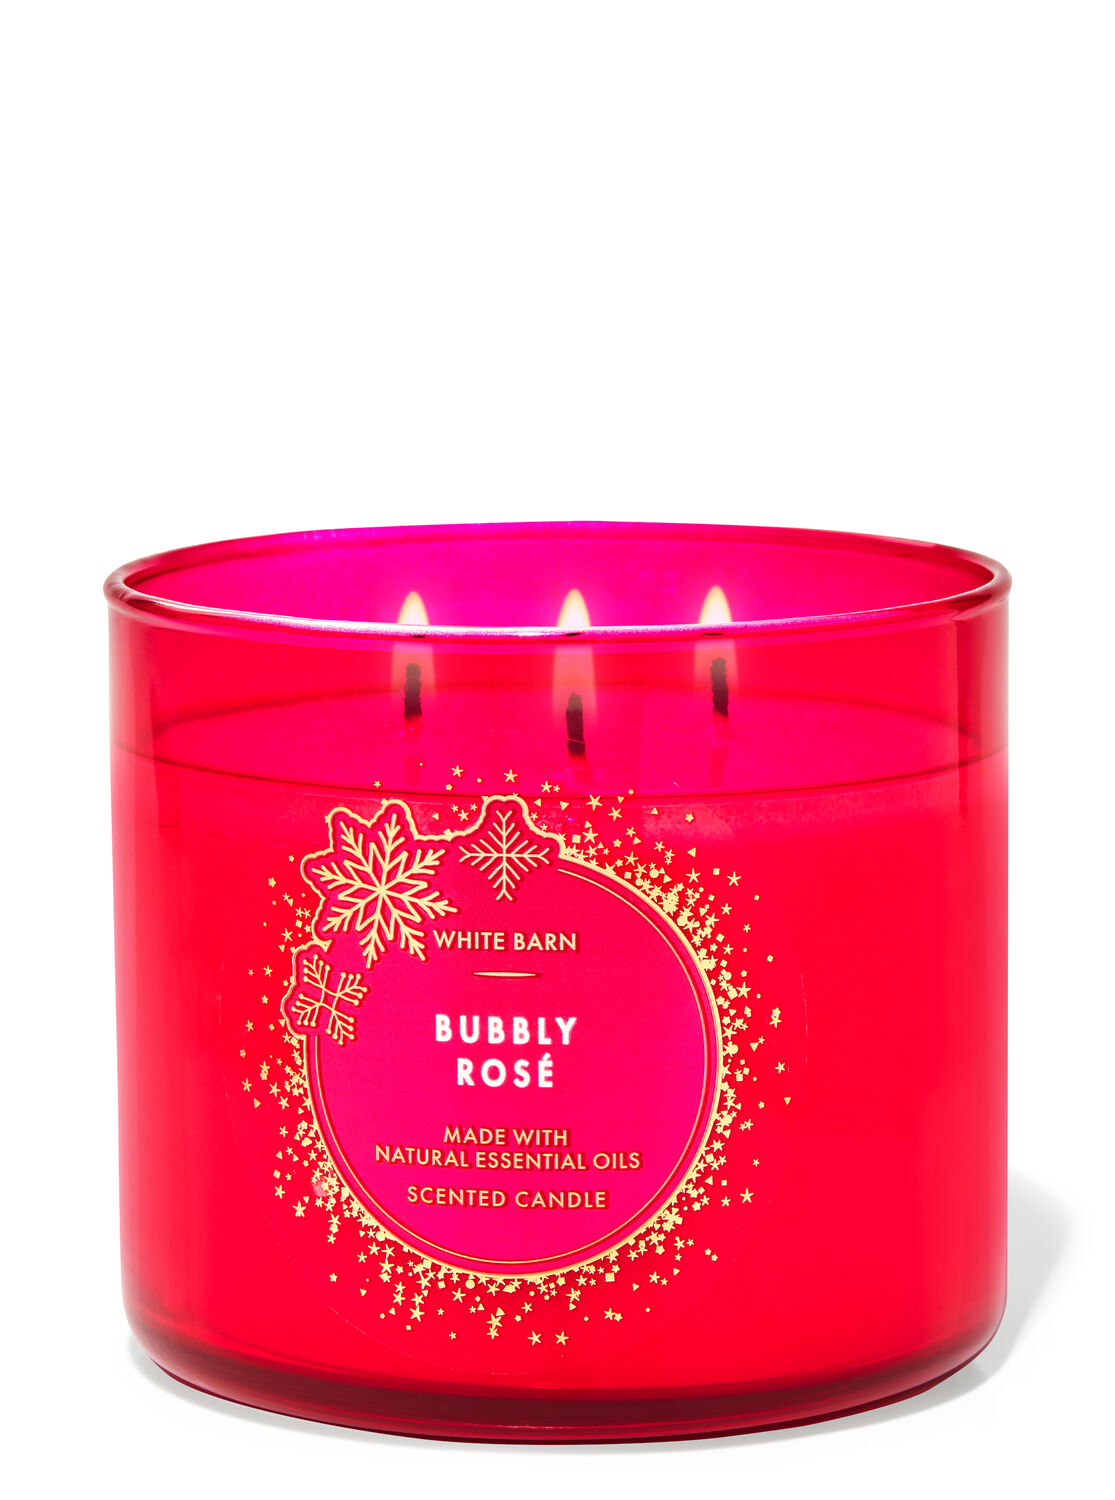 White Barn Bubbly Rosé 3-Wick Candle